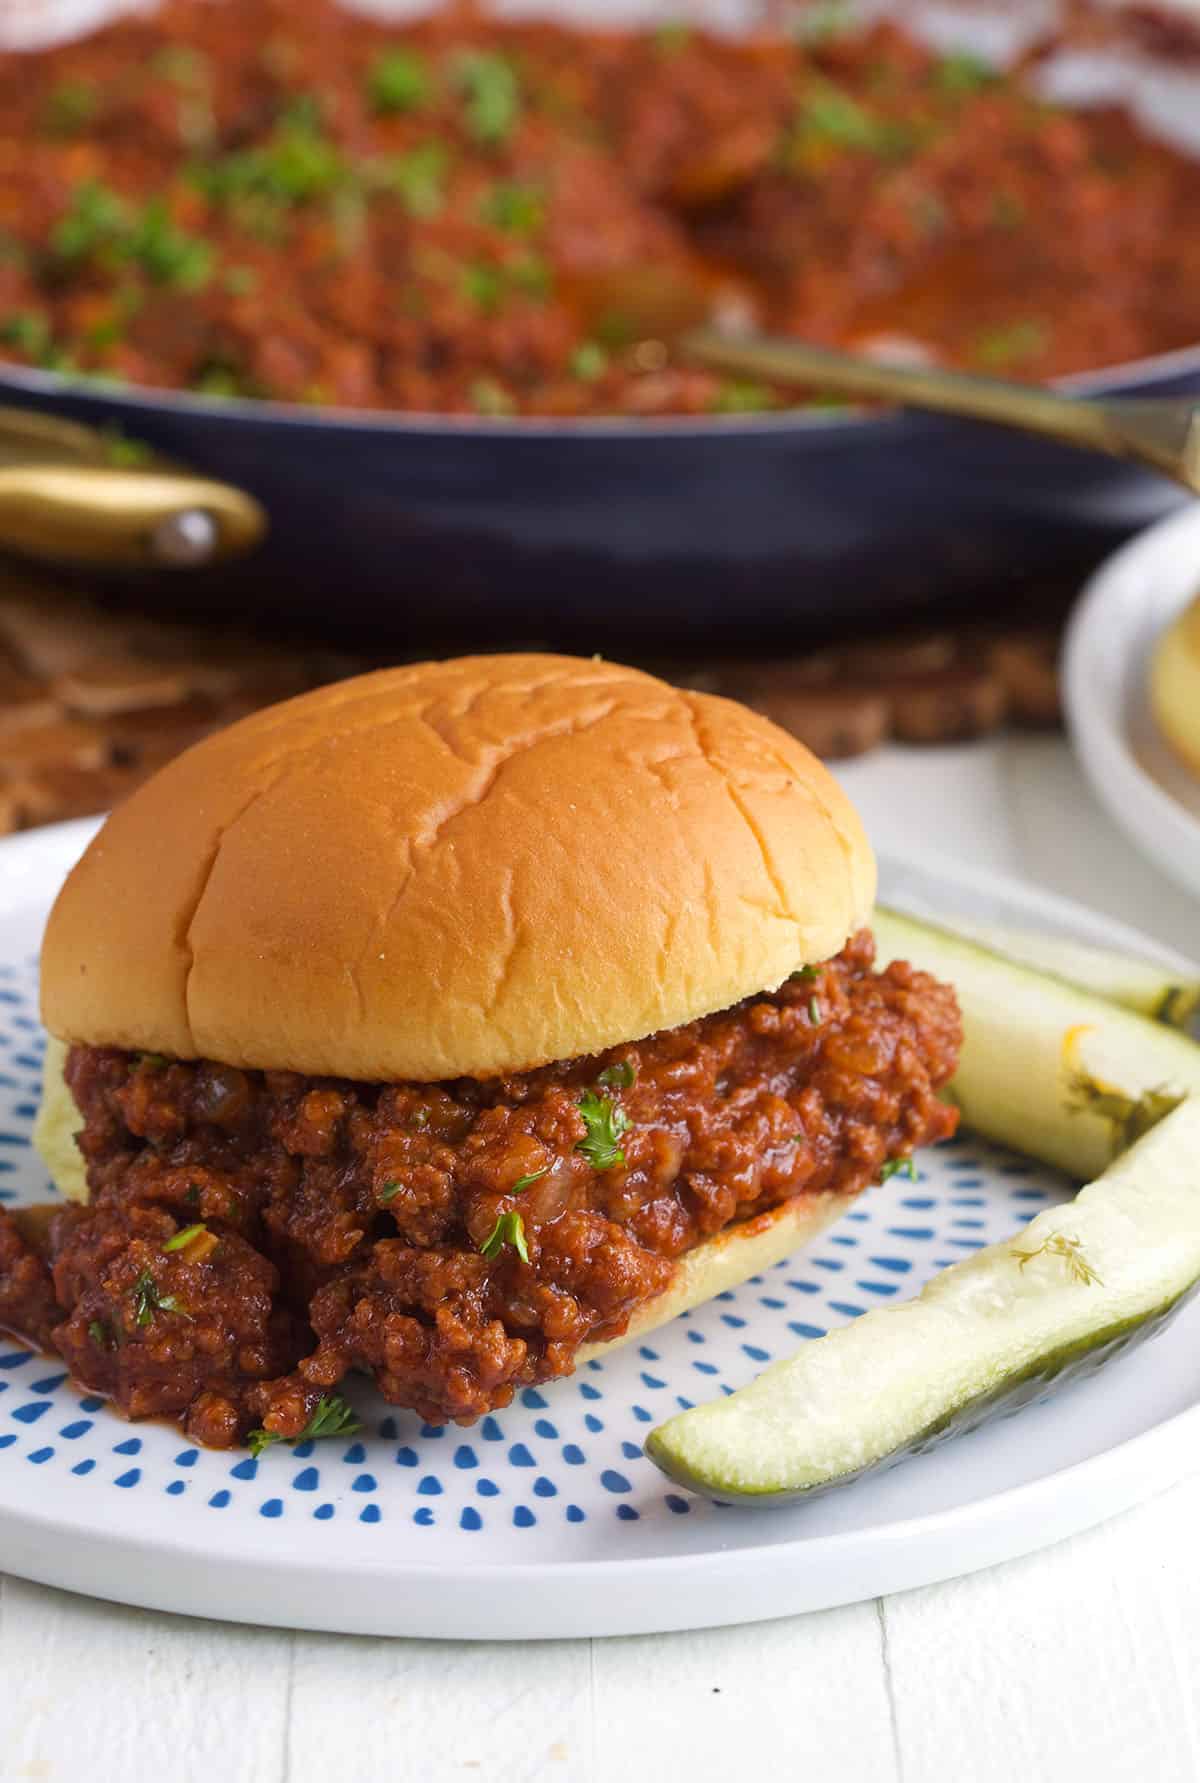 Sloppy Joe on a bun with pickles on a white plate with blue spots.